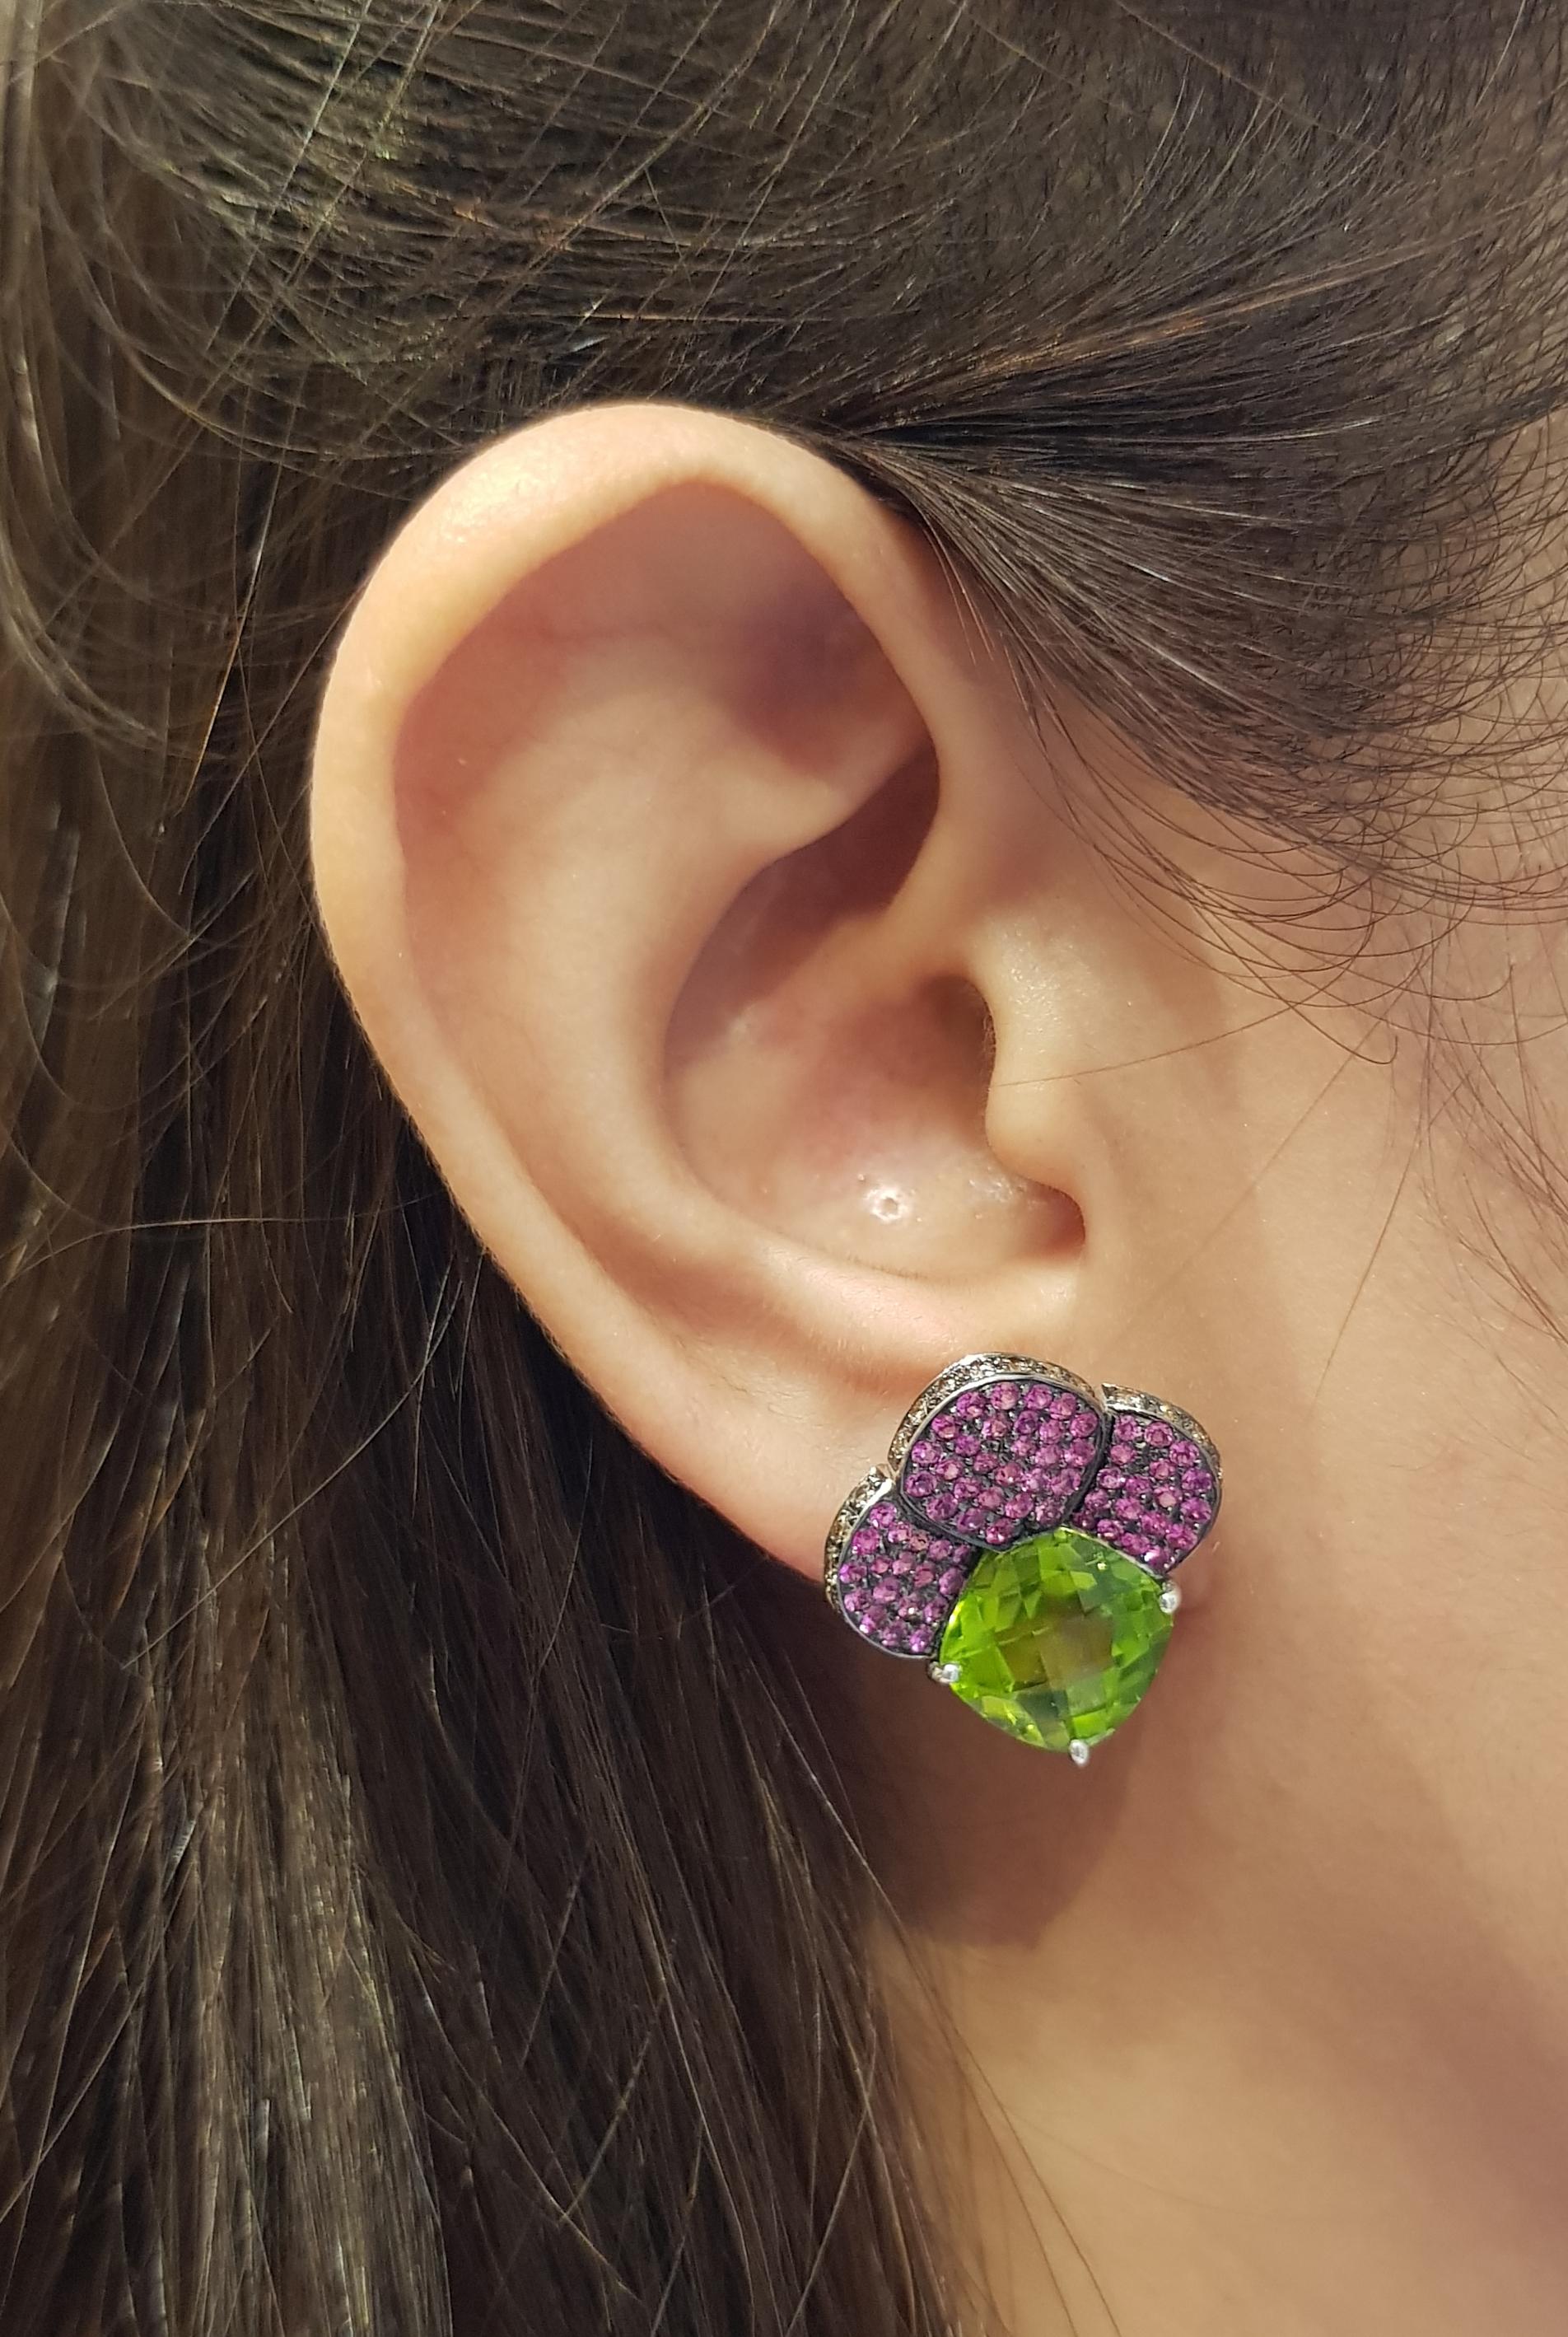 Peridot 9.90 carats with Pink Sapphire 1.51 carats and Brown Diamond 0.63 carat Earrings set in 18 Karat White Gold Settings

Width:  2.0 cm 
Length: 2.1 cm
Total Weight: 10.82 grams

